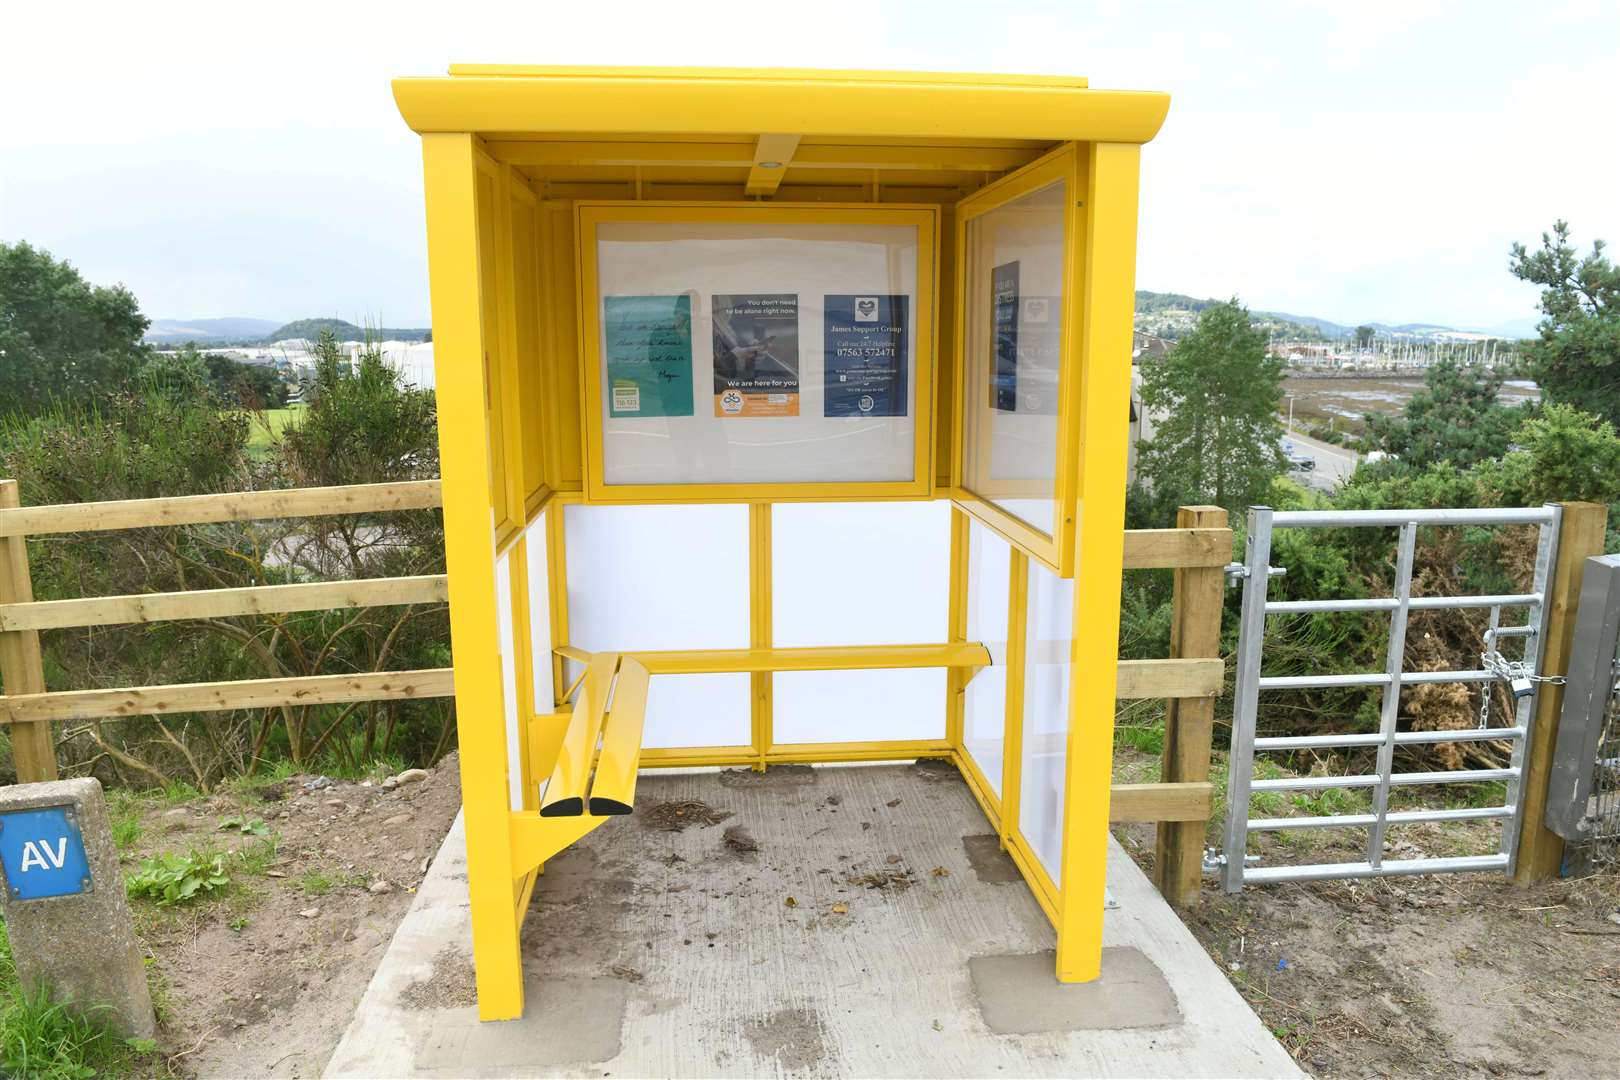 The hut on the northbound side of the Kessock Bridge will give people a place to 'pause' its backers hope.